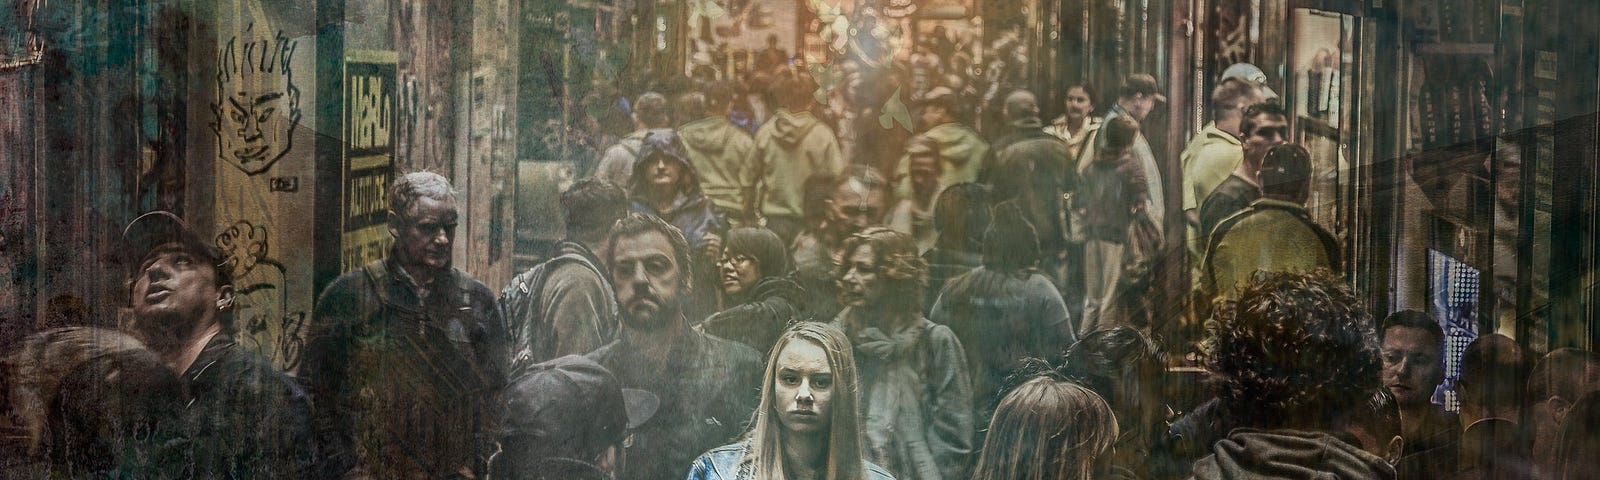 Image of a woman isolated in a crowd